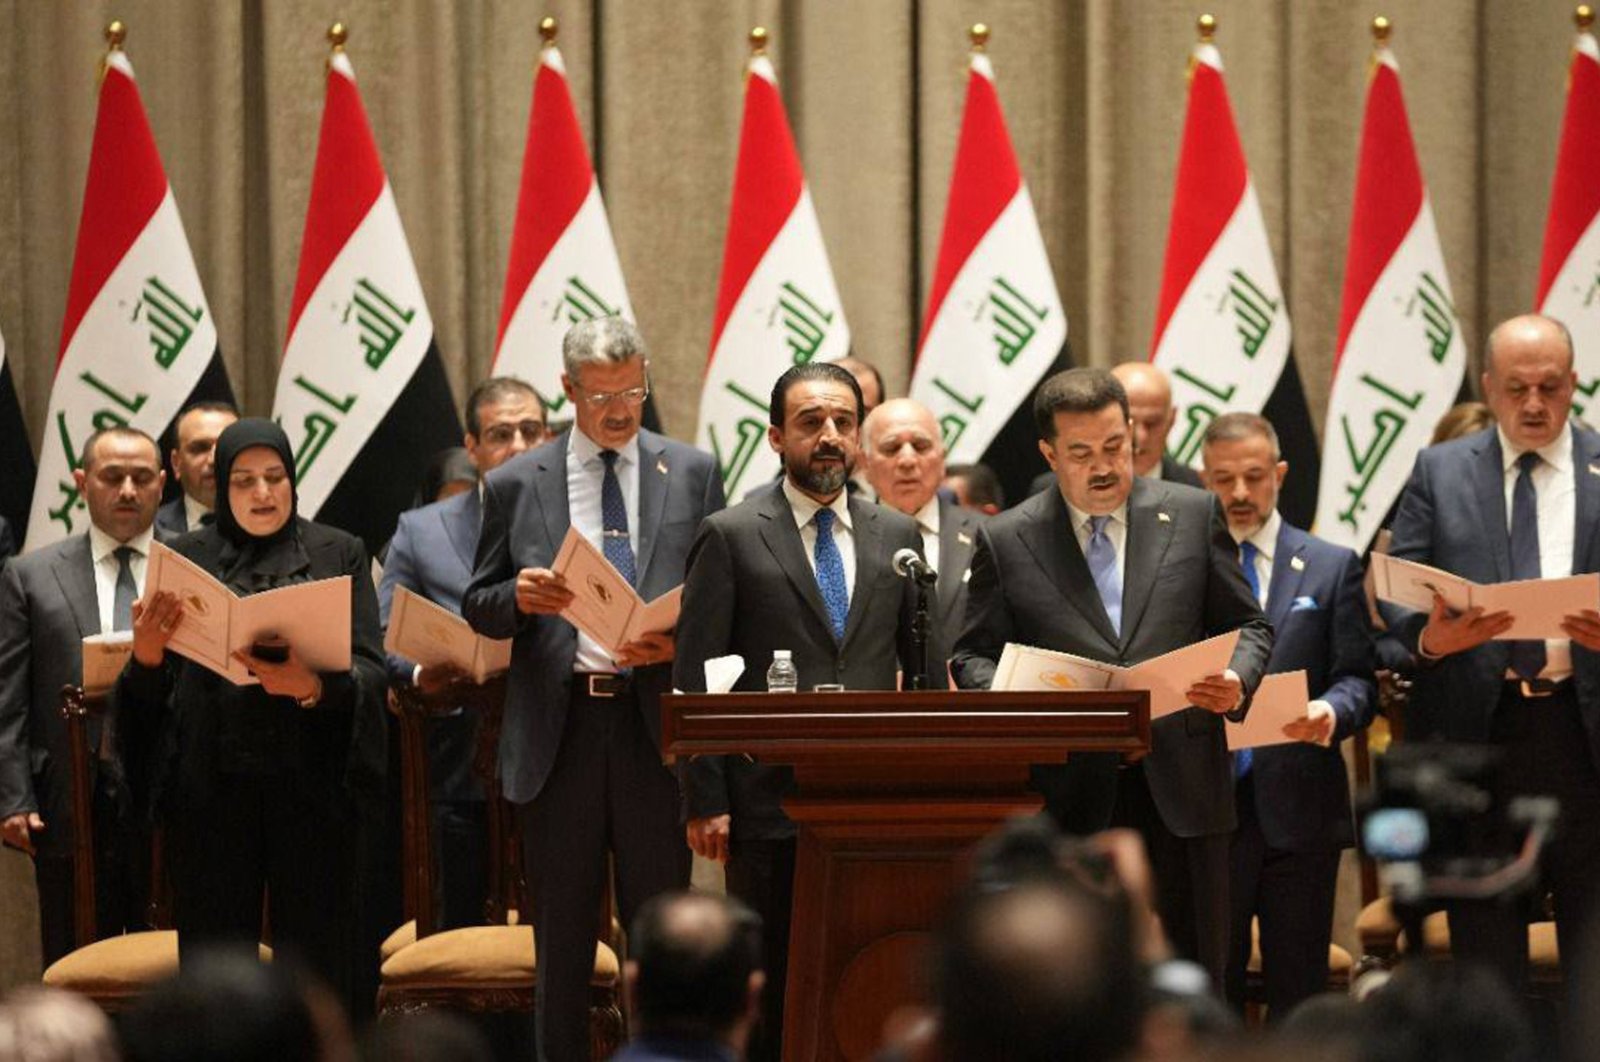 A handout picture released by the Iraqi parliament media office shows Members of the new cabinet taking the constitutional oath during the Iraqi parliament session in Baghdad, Iraq on 27 October 2022. (EPA Photo)